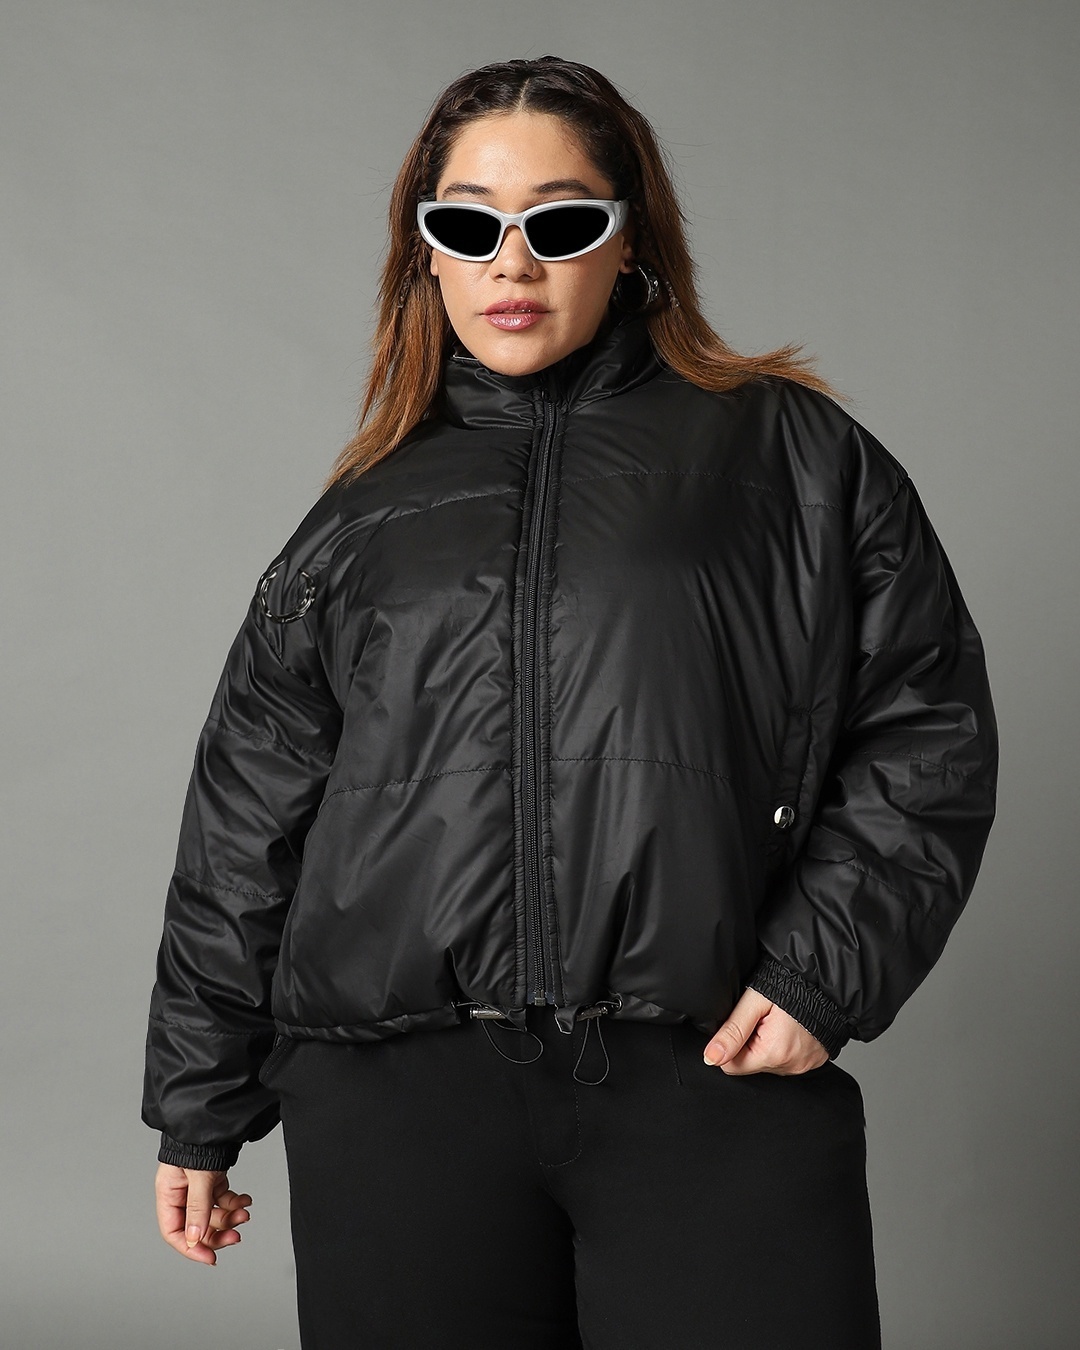 Buy women's plus size jackets and vests - VOVK women's clothing online store